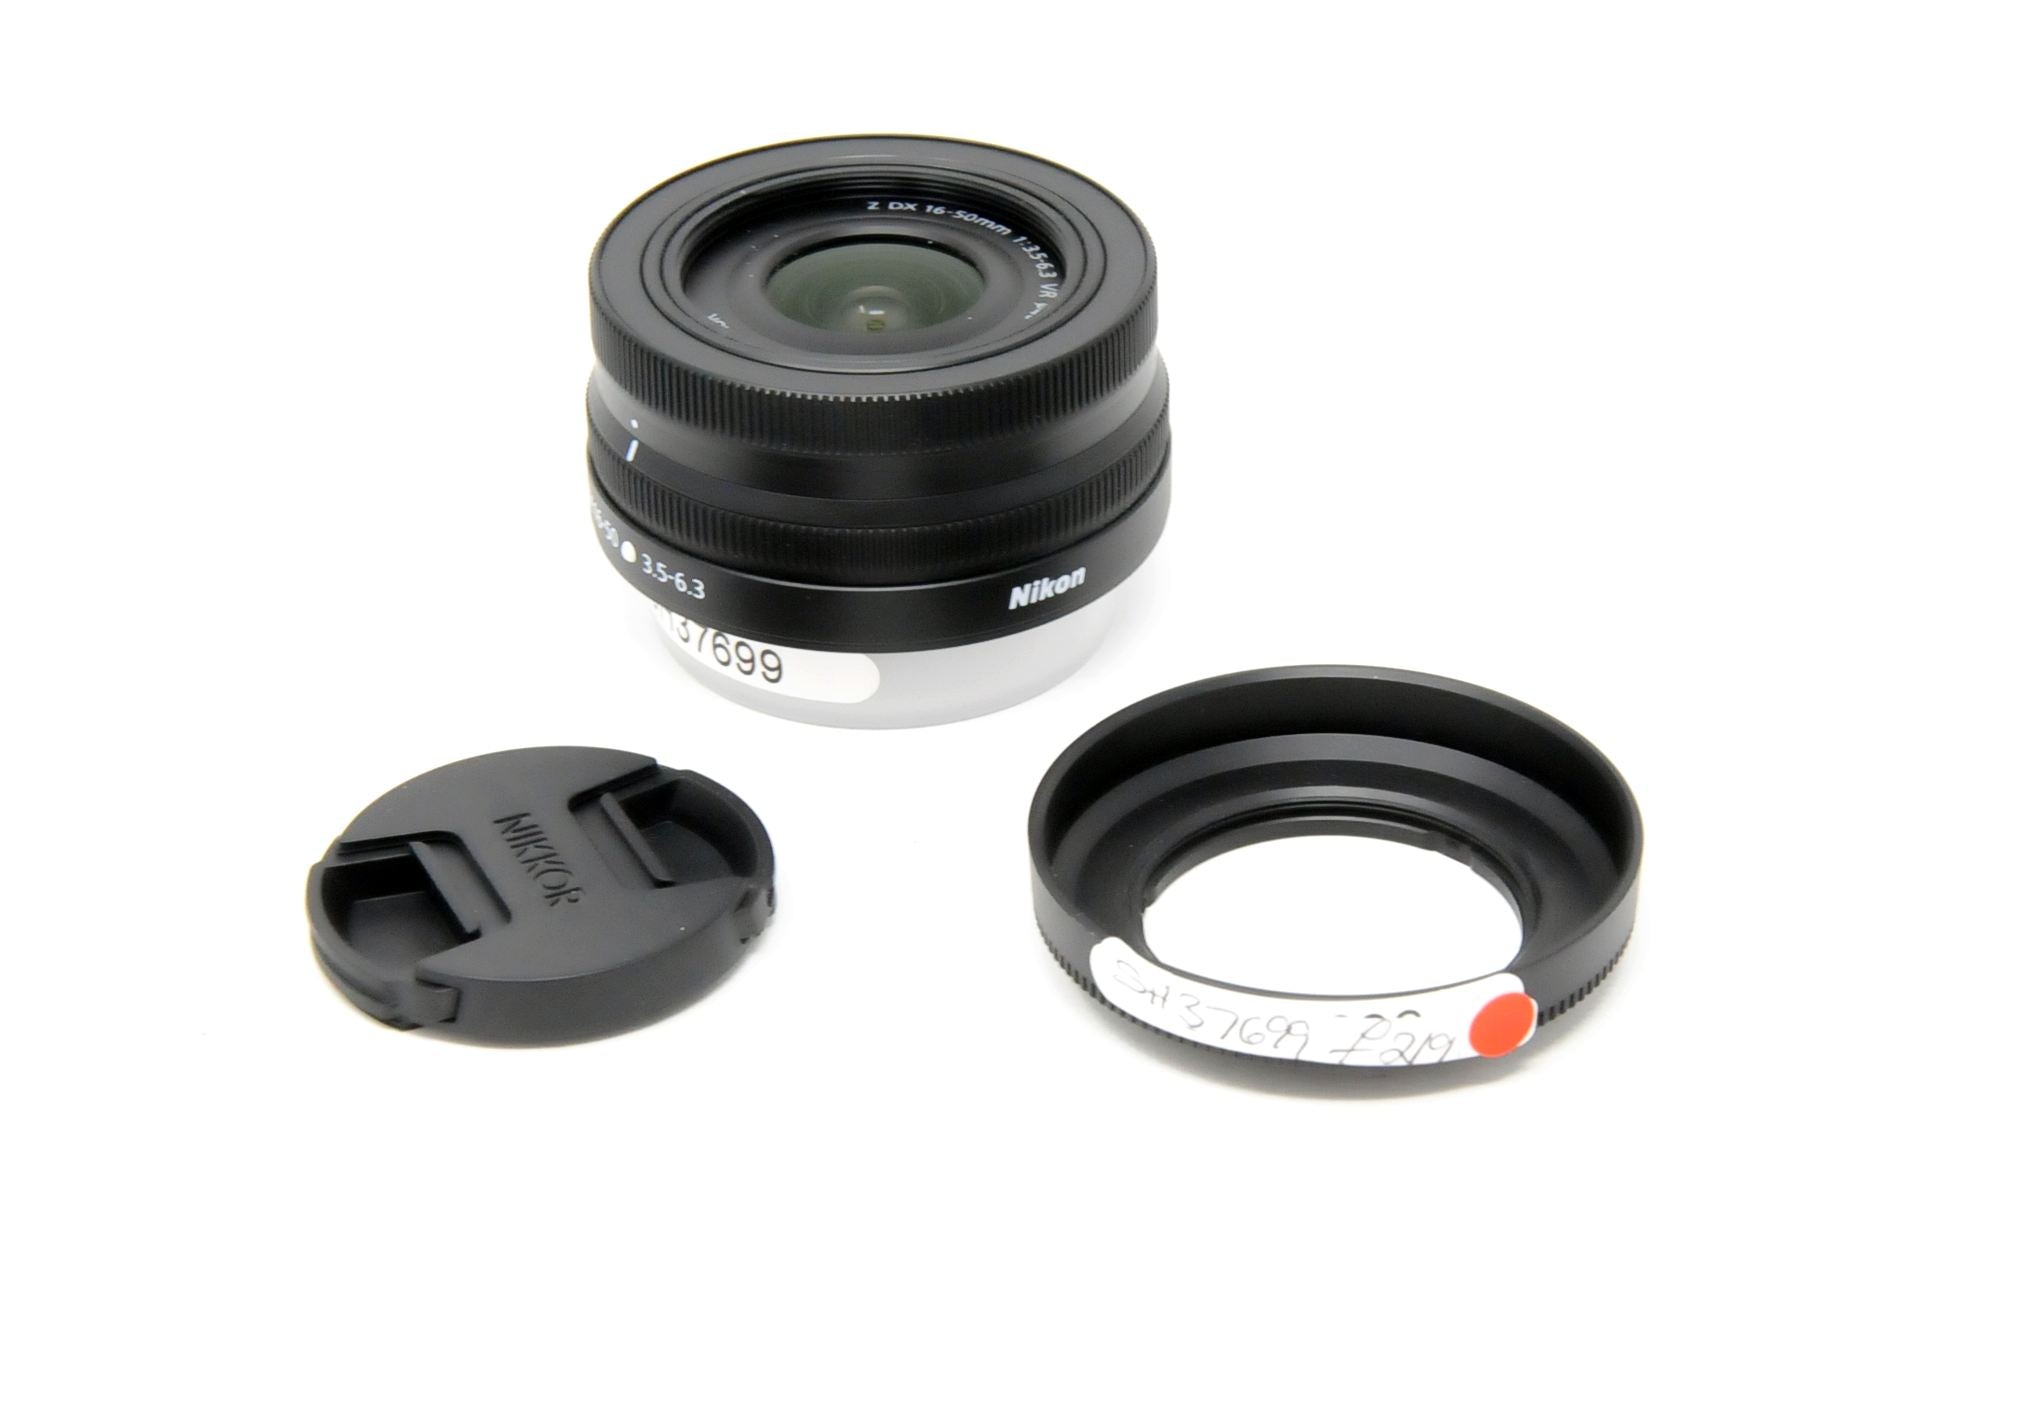 Product Image of Used Nikon Z DX 16-50mm F3.5/6.3 VR Lens with hood. (SH37699)